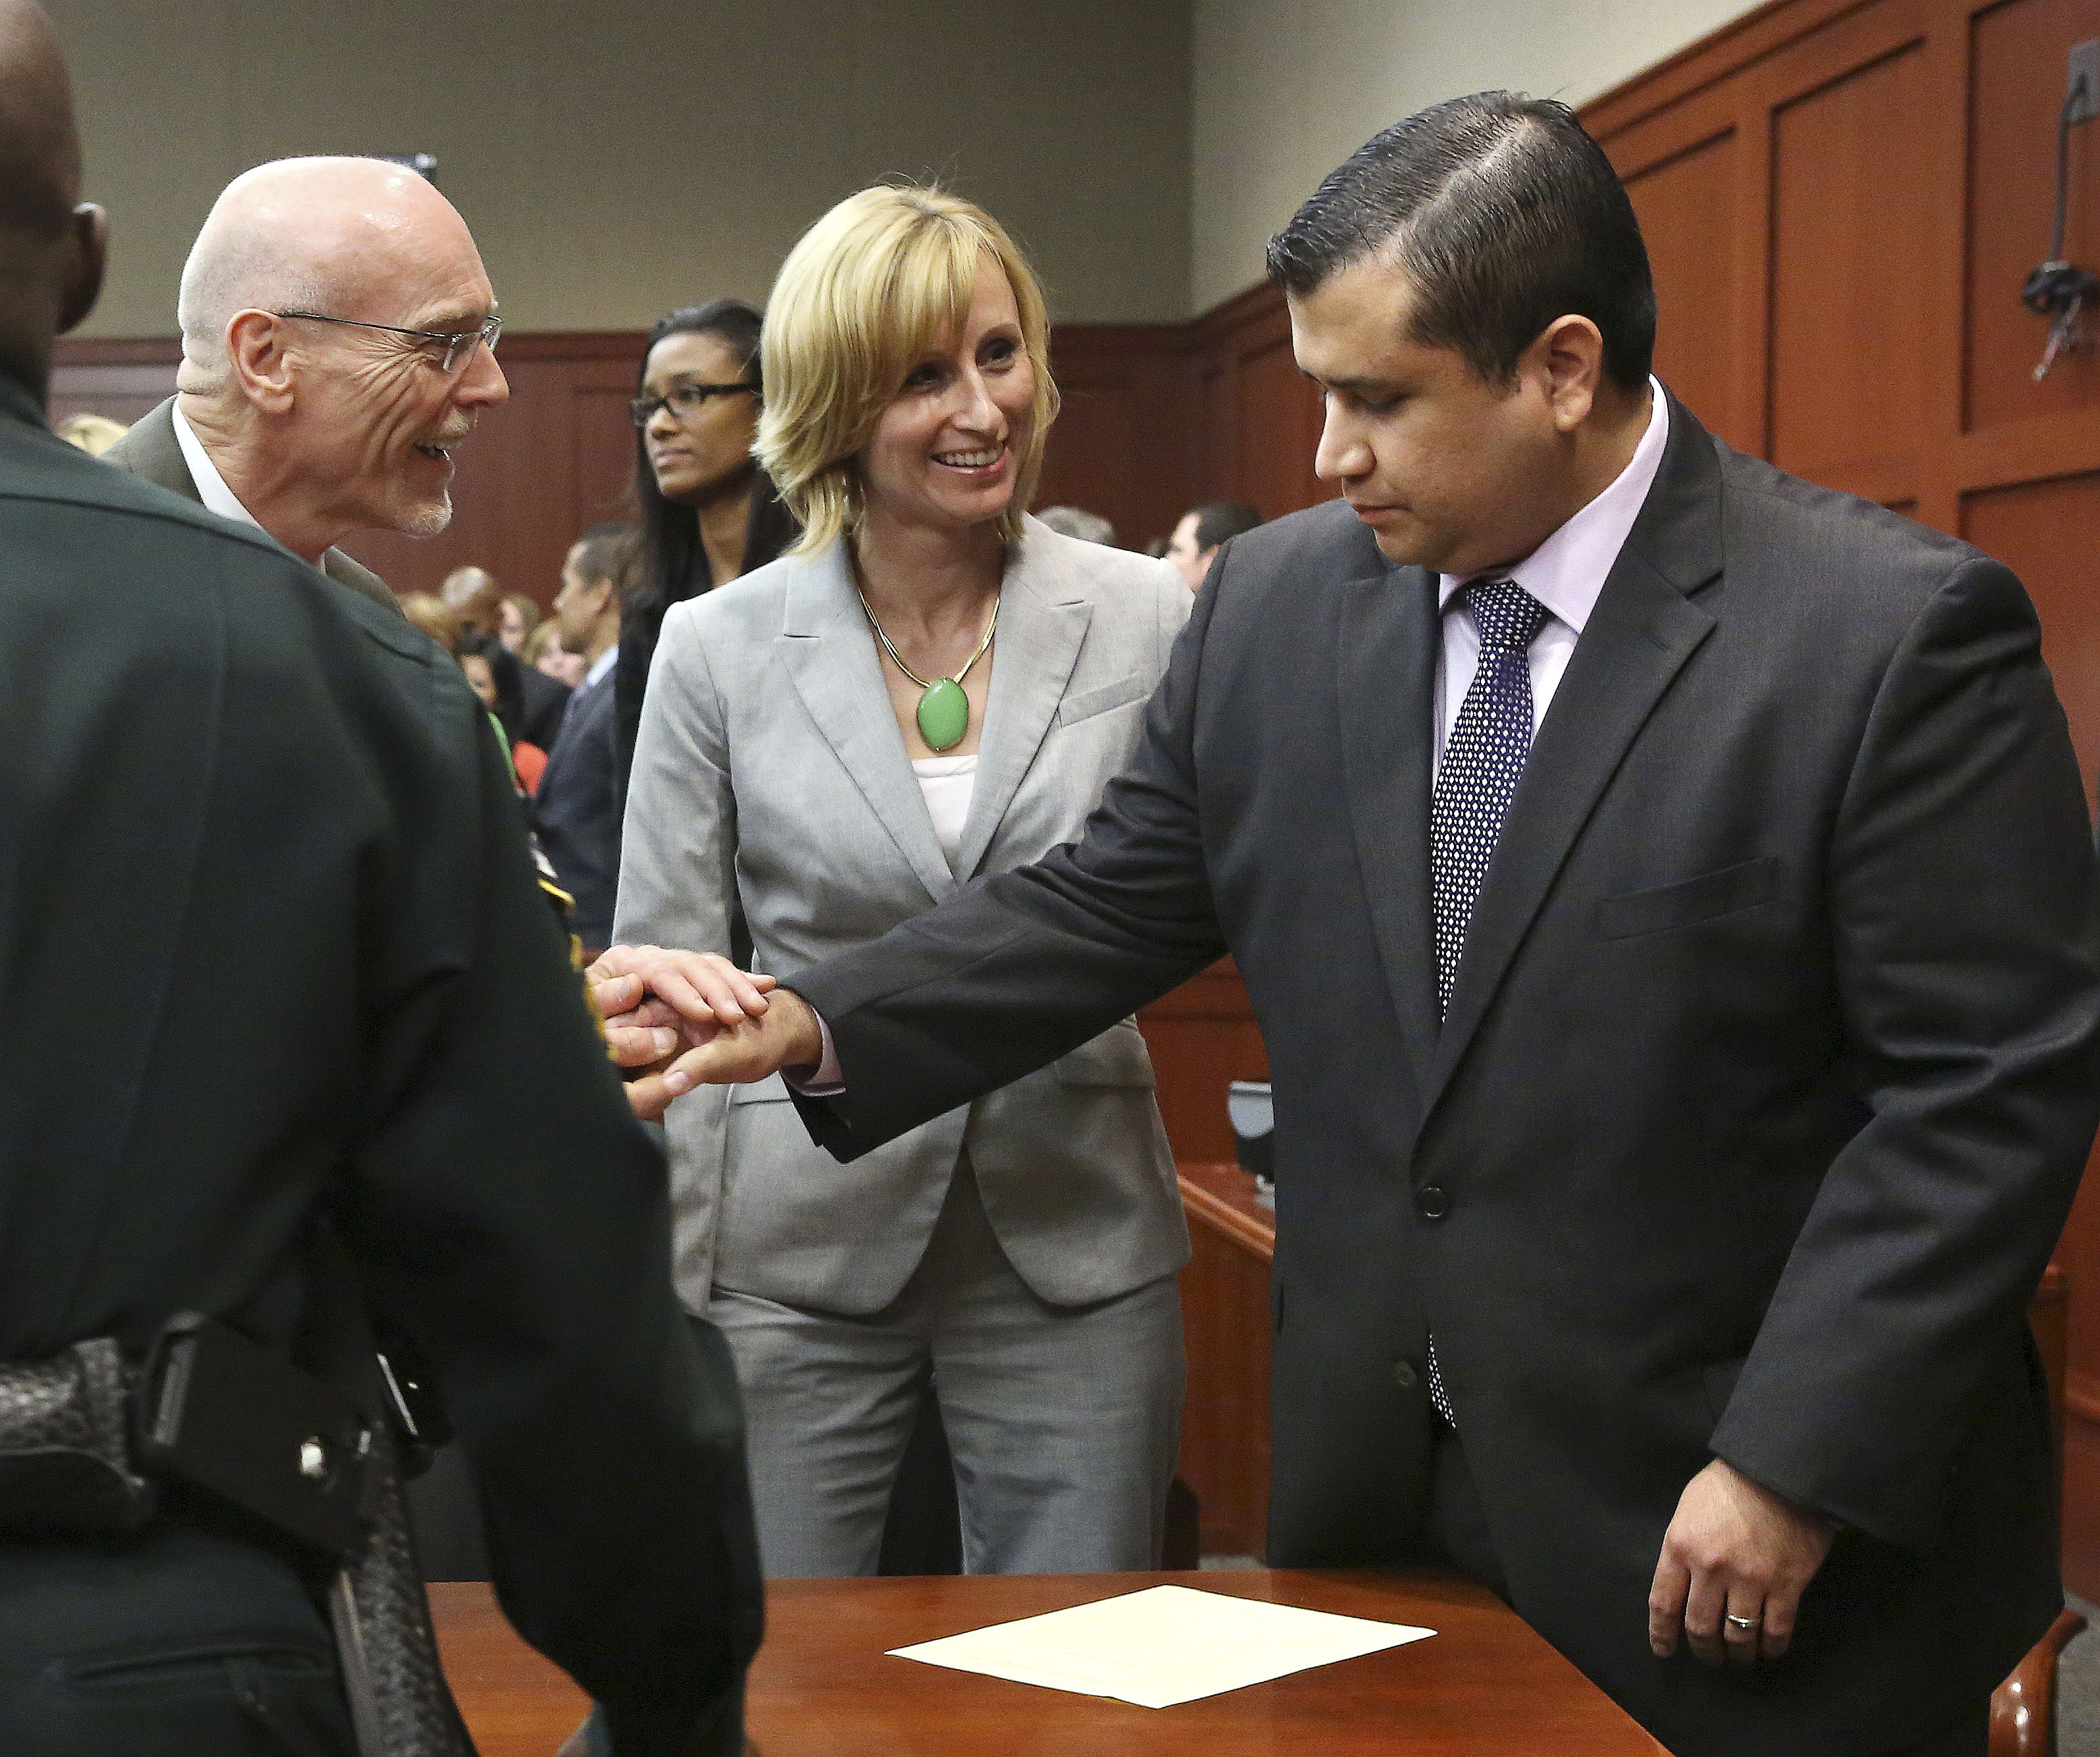 George Zimmerman, right, is congratulated by his defence team after being found not guilty. Photo: AP